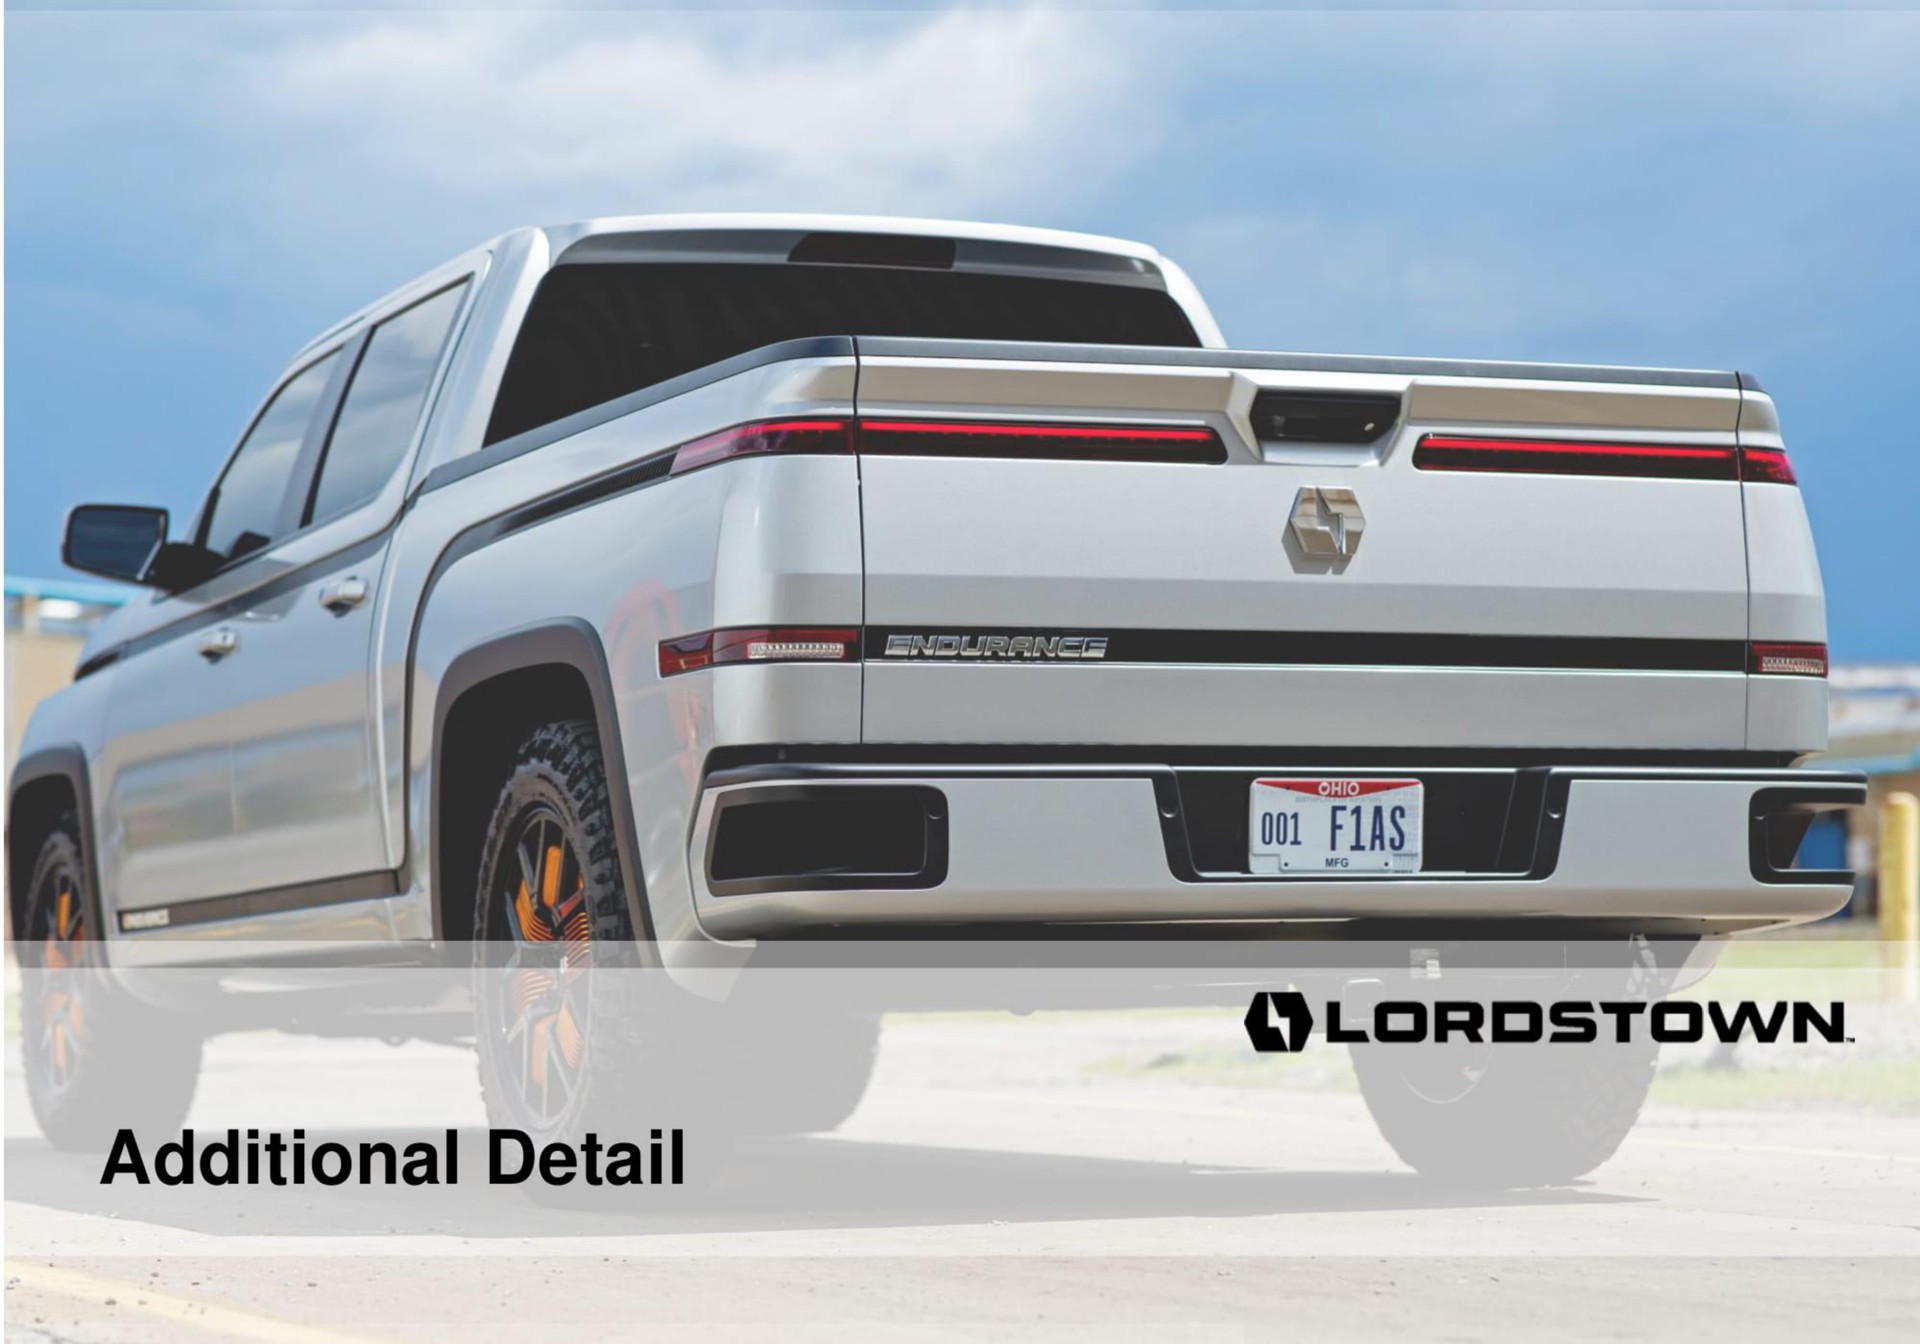 additional detail | Lordstown Motors